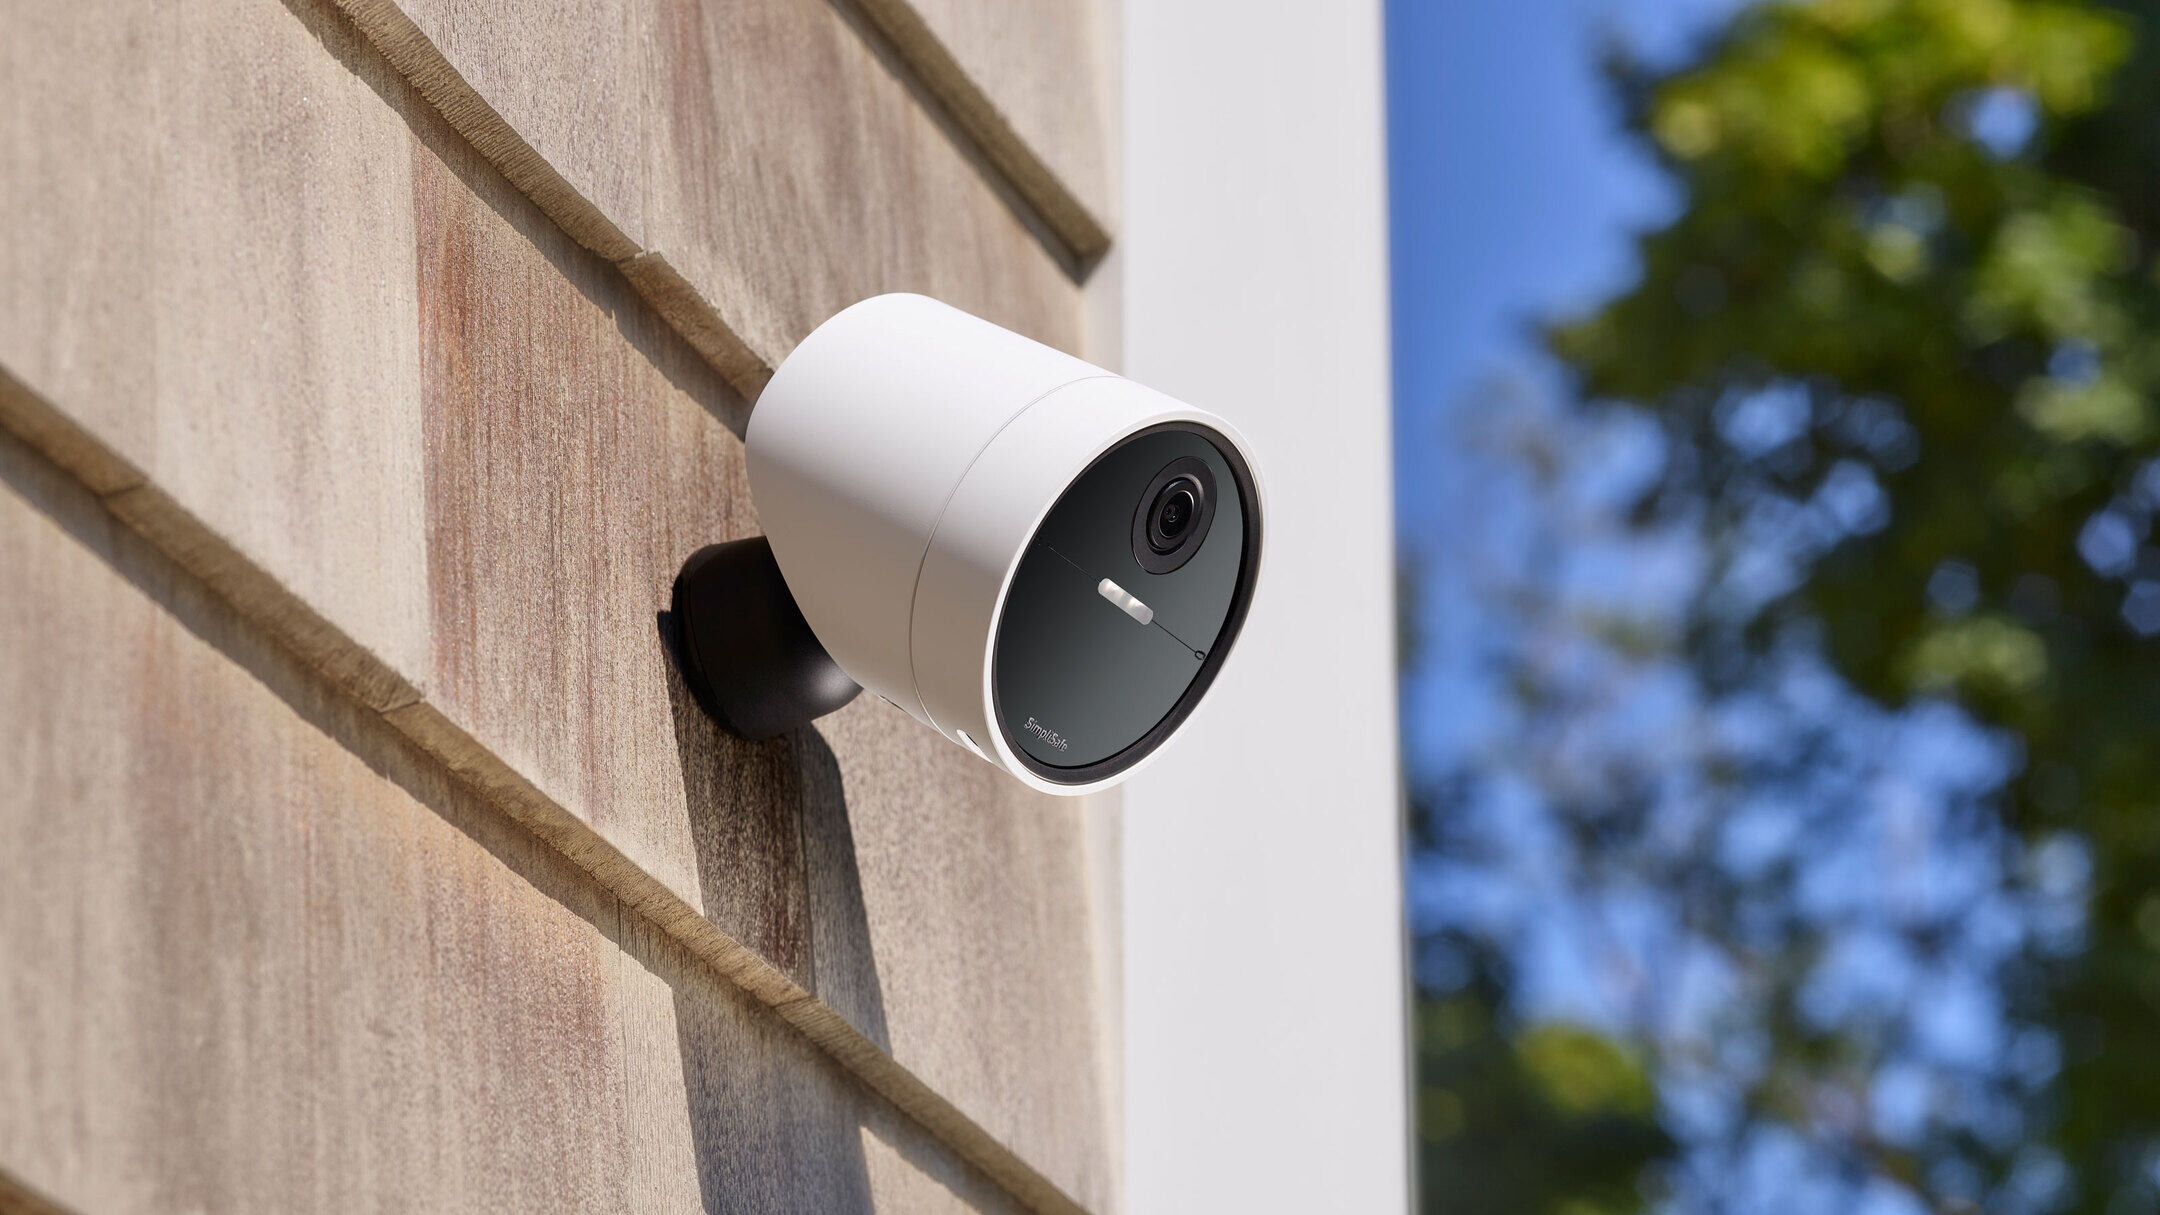 Where Is The Reset Button On Simplisafe Outdoor Camera